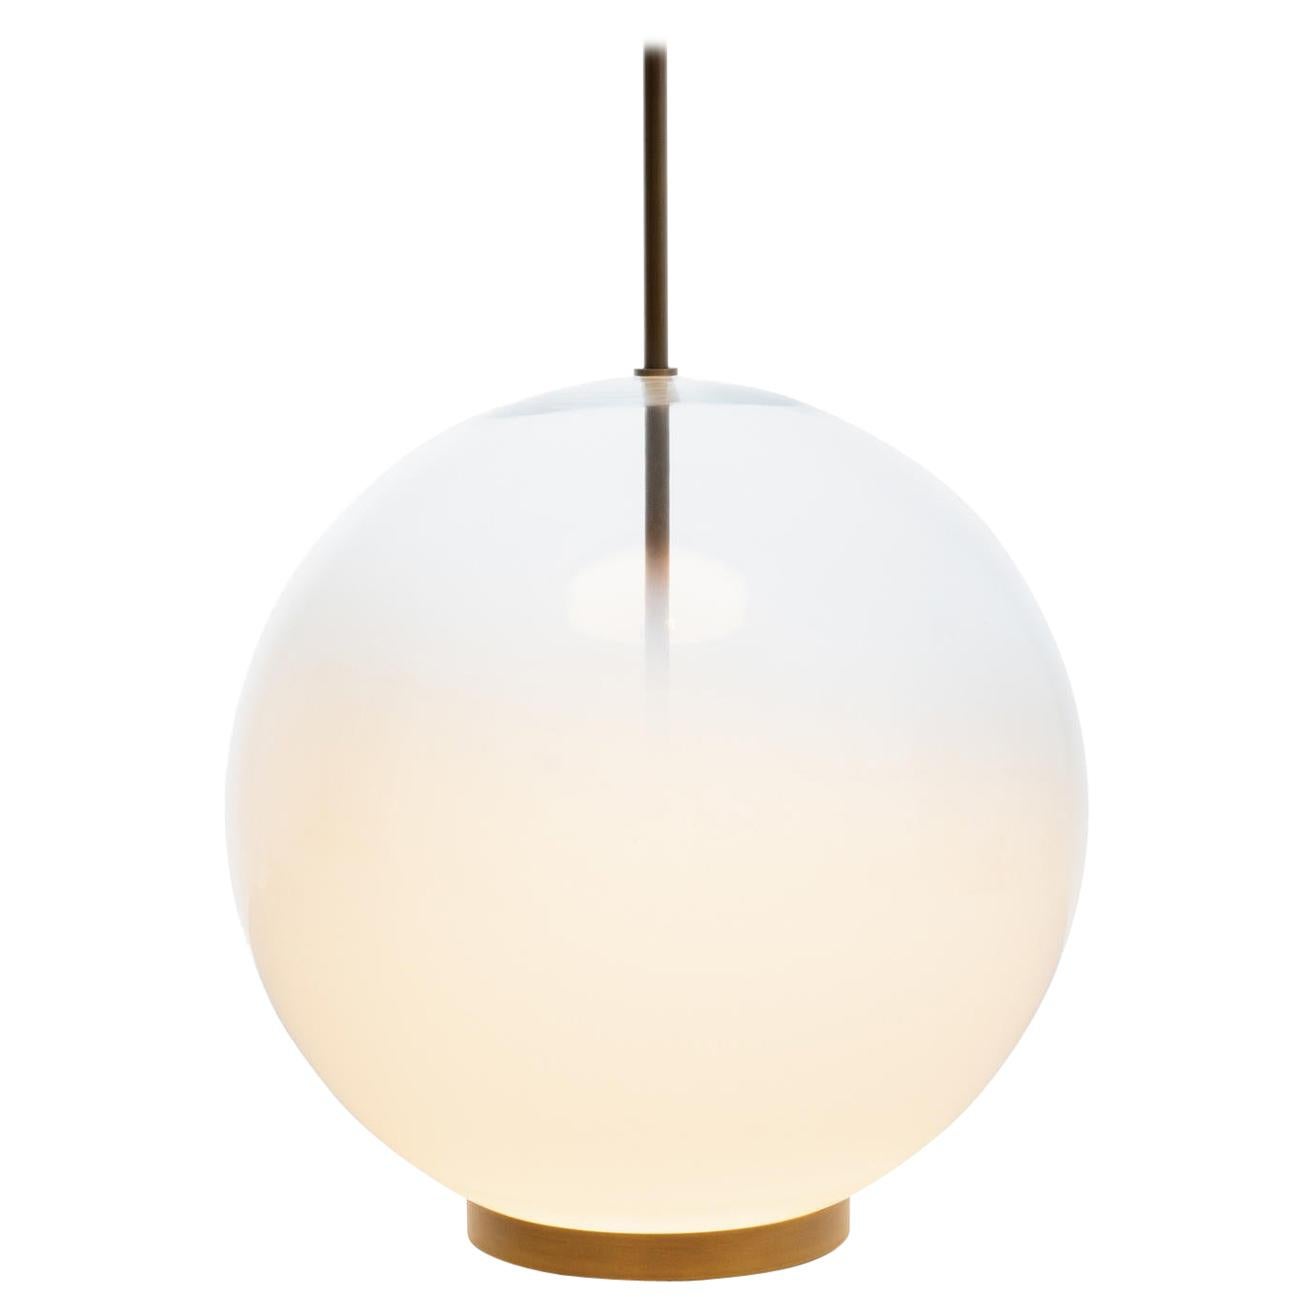 HOLLY HUNT Misty Round LED Table Lamp in Burnished Natural Brass by VeniceM